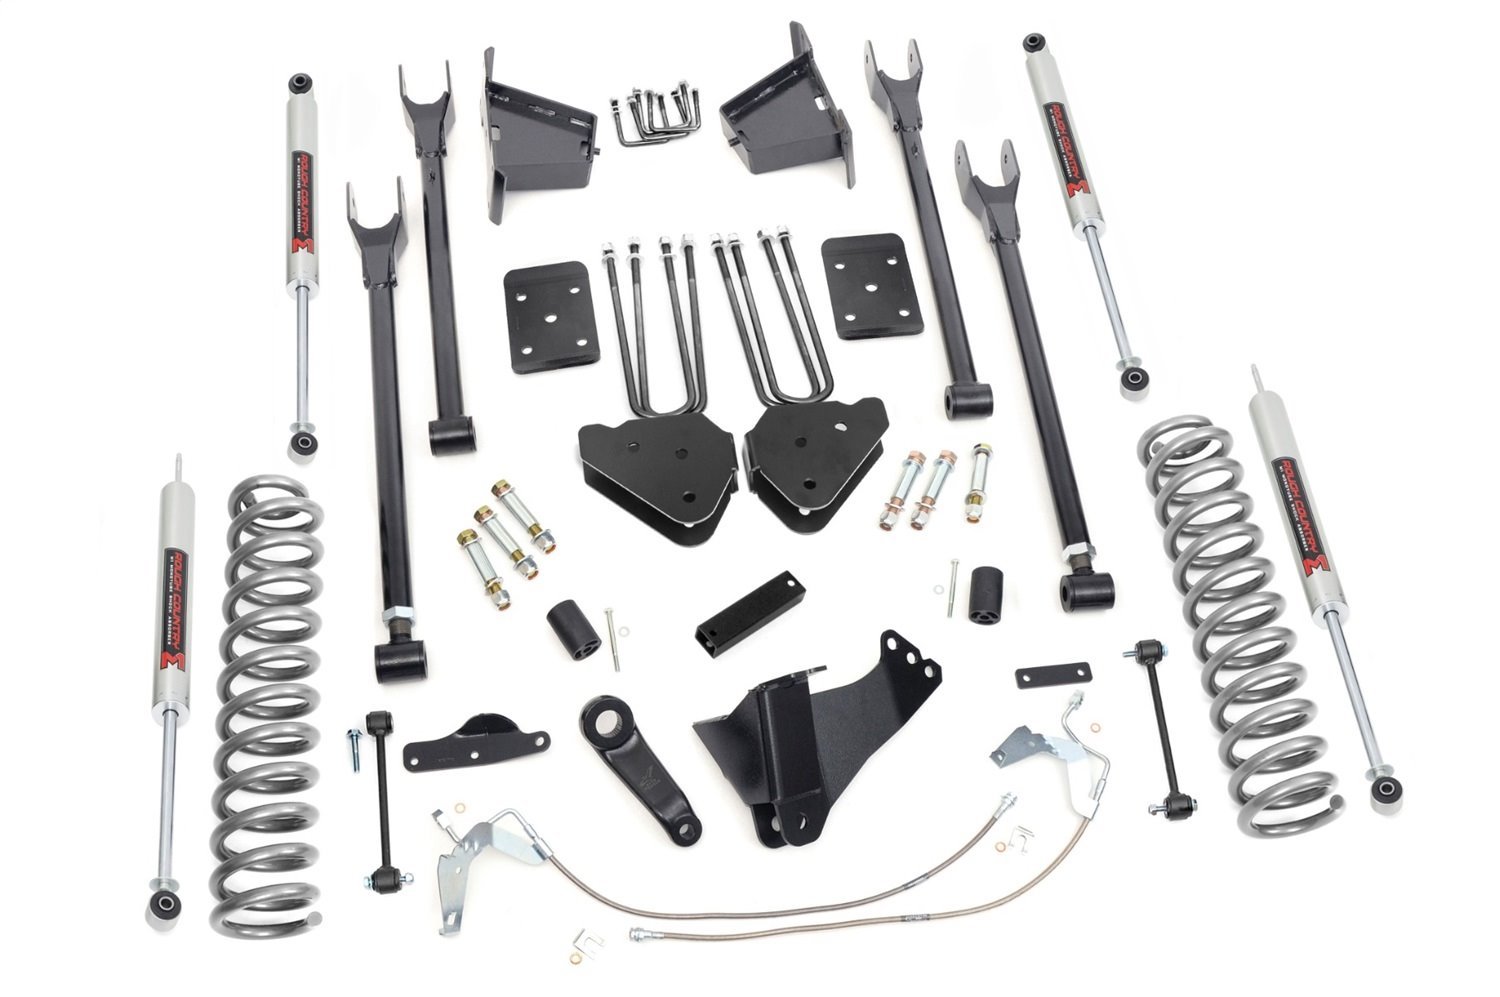 59240 8 in. Lift Kit, 4 Link, M1, Ford Super Duty 4WD (2008-2010)